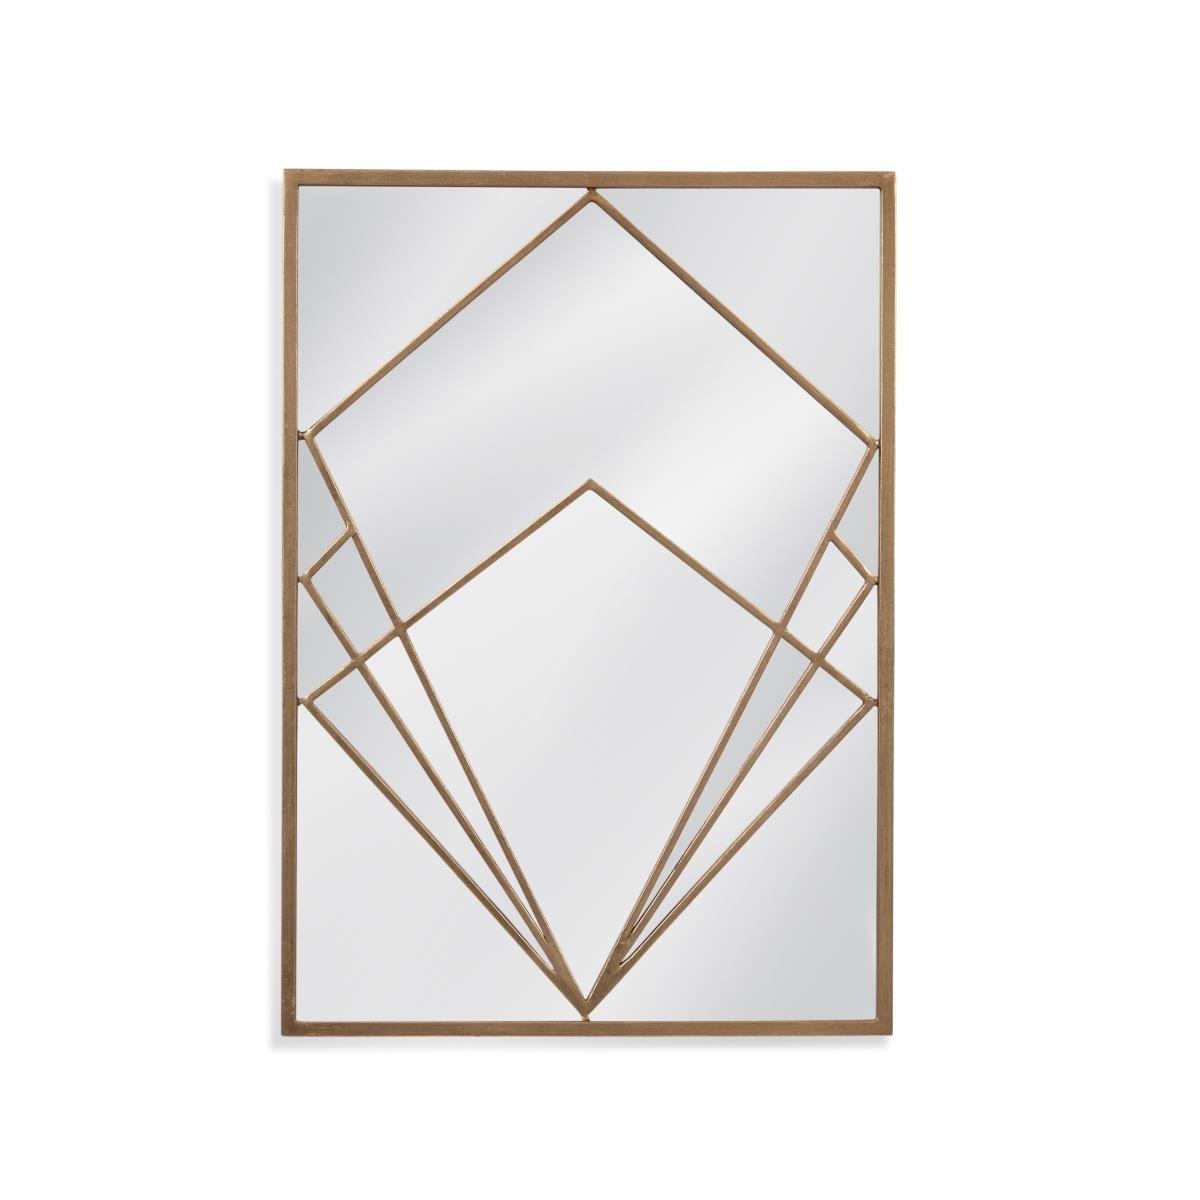 M4211 Jase Wall Mirror, Gold - 20 X 28 In.